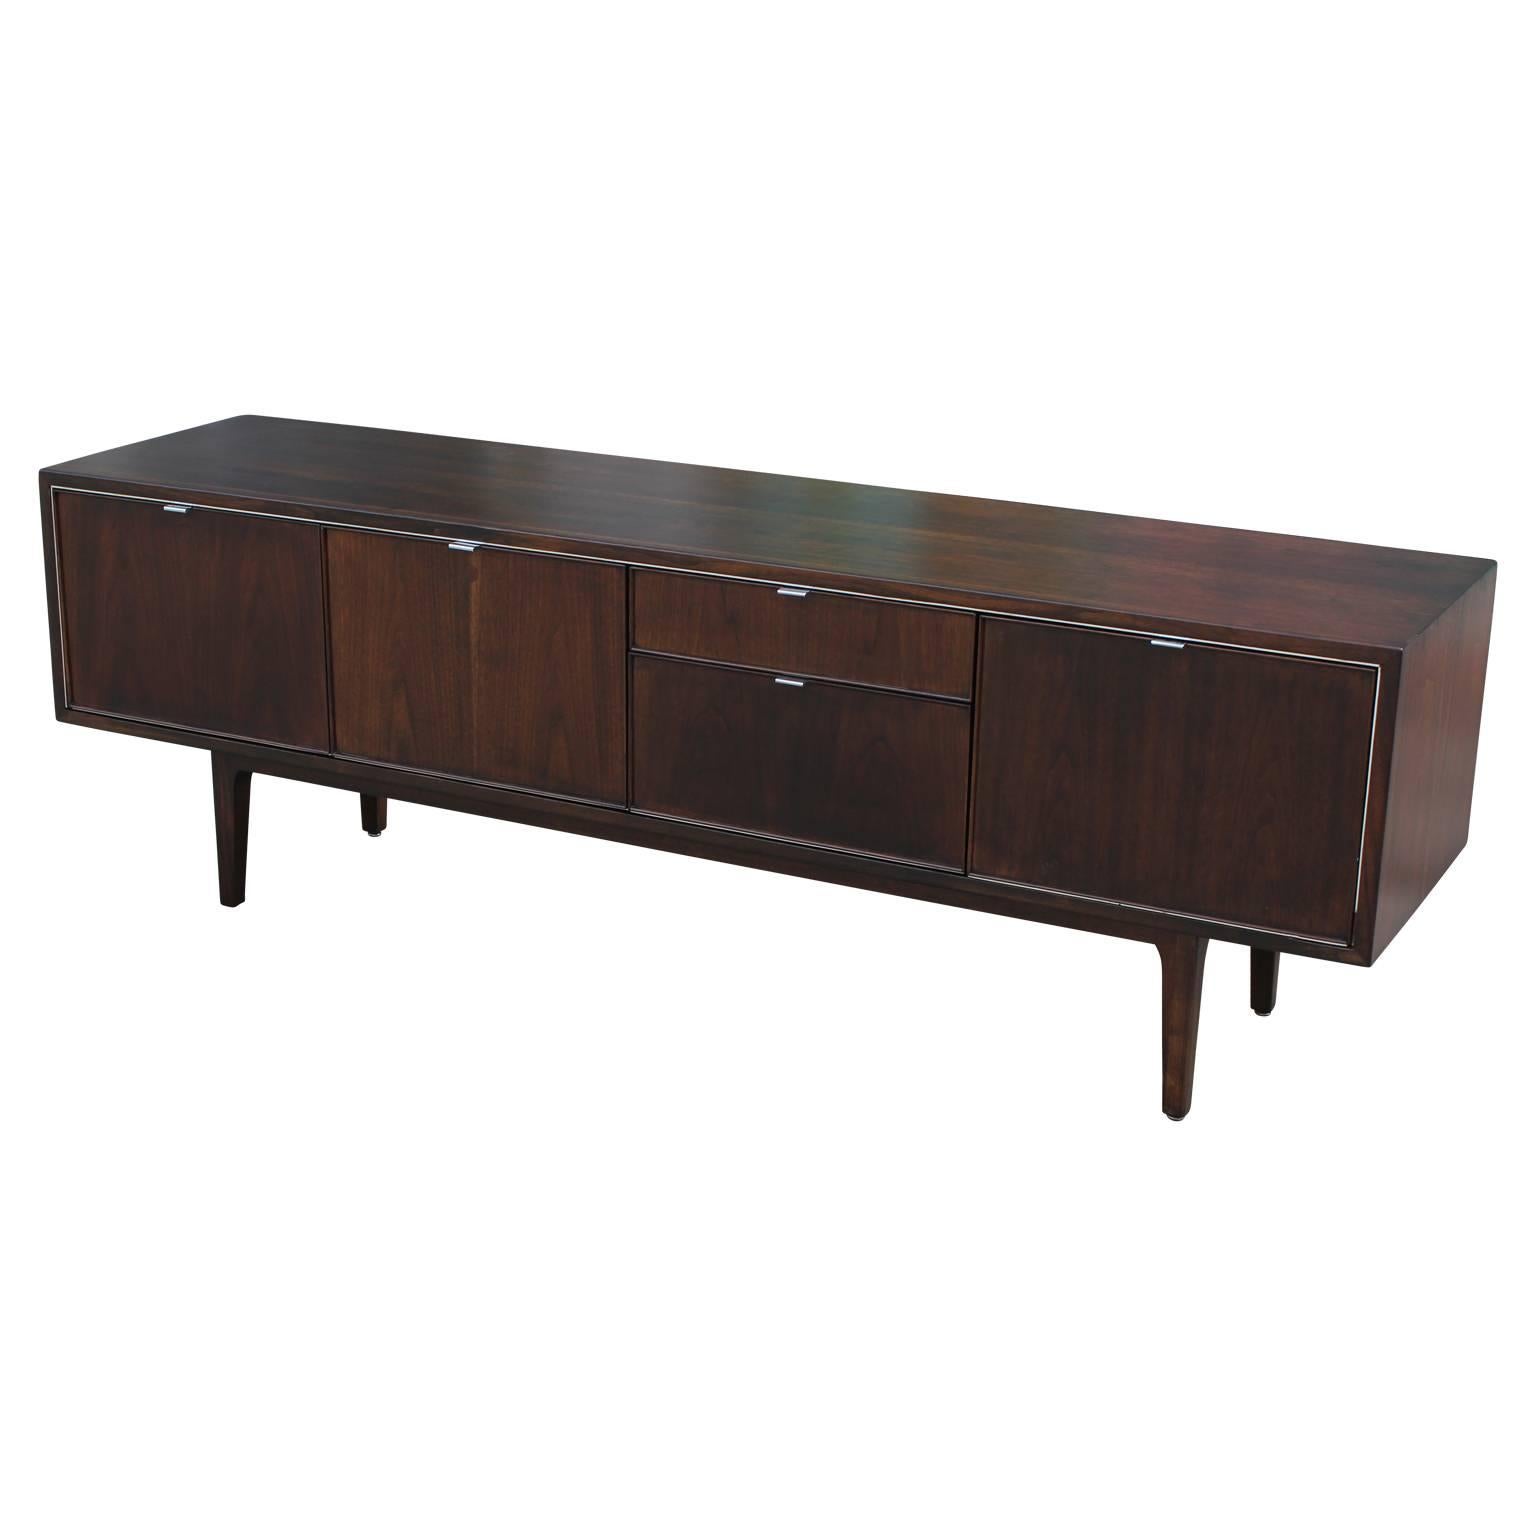 Gorgeous deep walnut credenza by Stow Davis. This sideboard features four drawers, perfect for storage and a drop door that opens to reveal a single adjustable shelf.